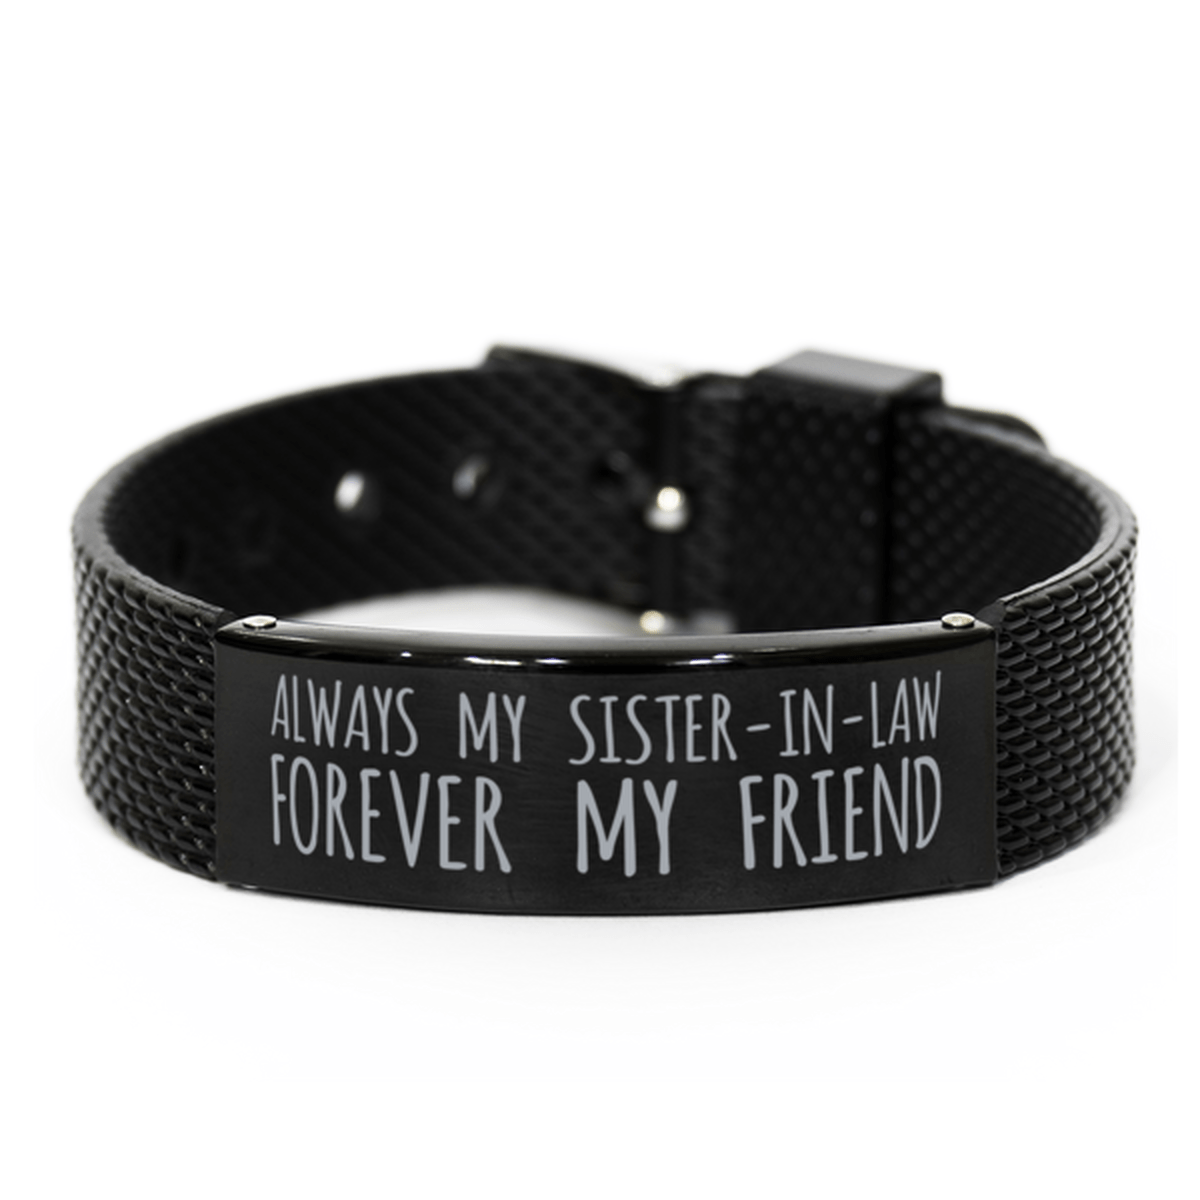 Inspirational Sister-In-Law Black Shark Mesh Bracelet, Always My Sister-In-Law Forever My Friend, Best Birthday Gifts for Family Friends